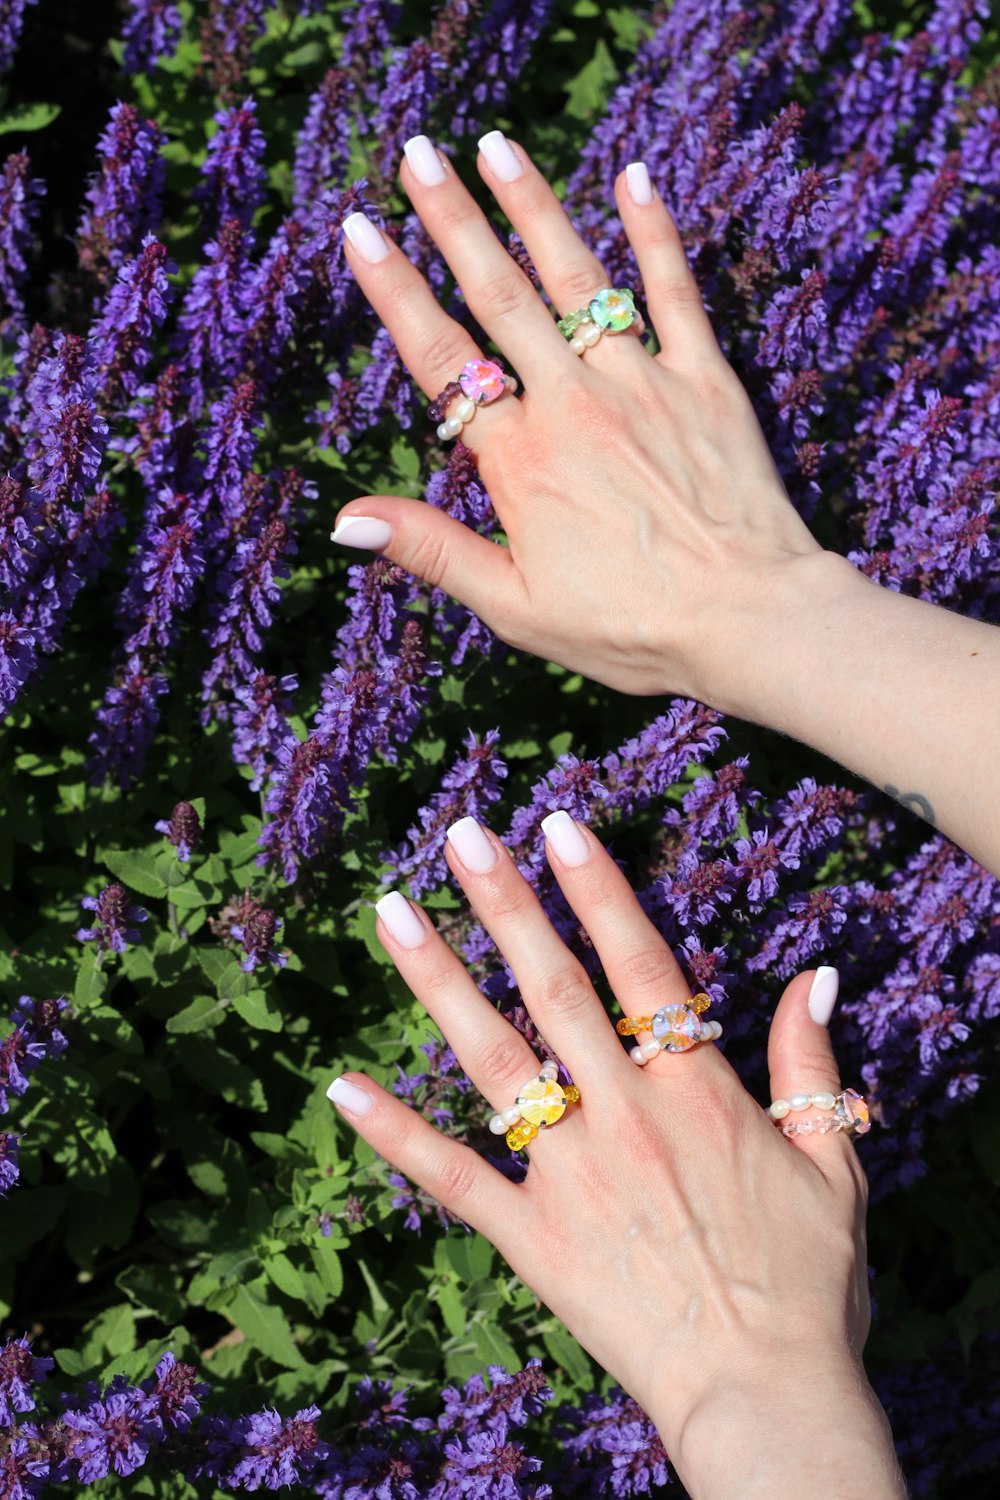 two women's hands with white and yellow nail polish